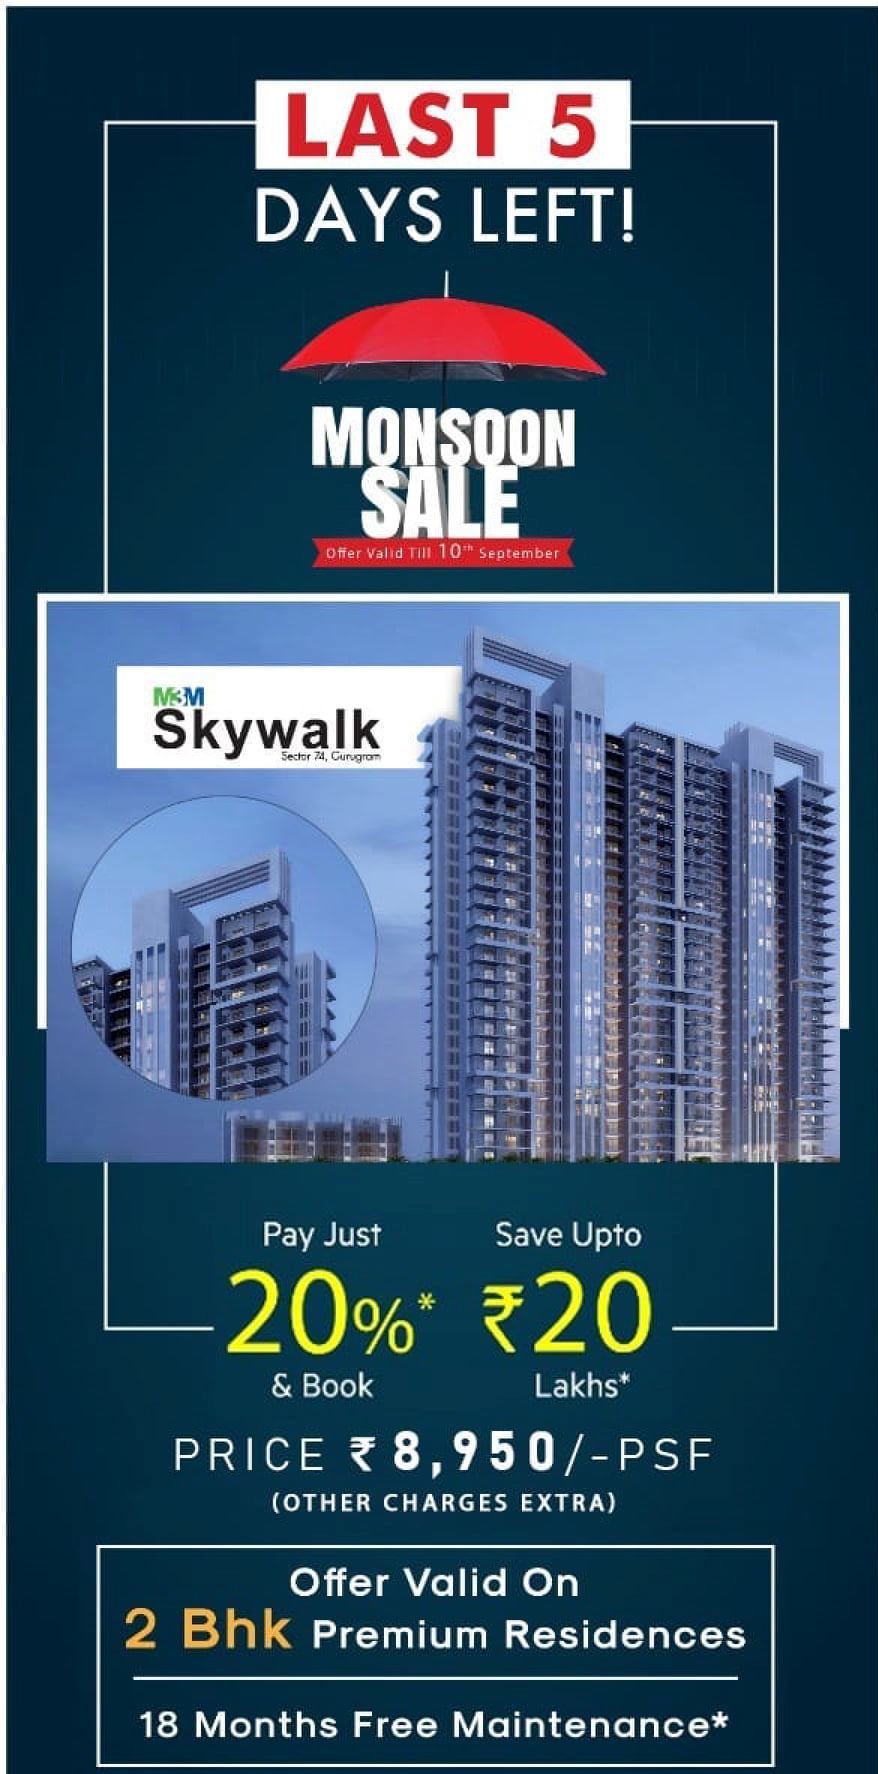 The last 5 days left monsoon sale at M3M Skywalk in Sector 74, Gurgaon